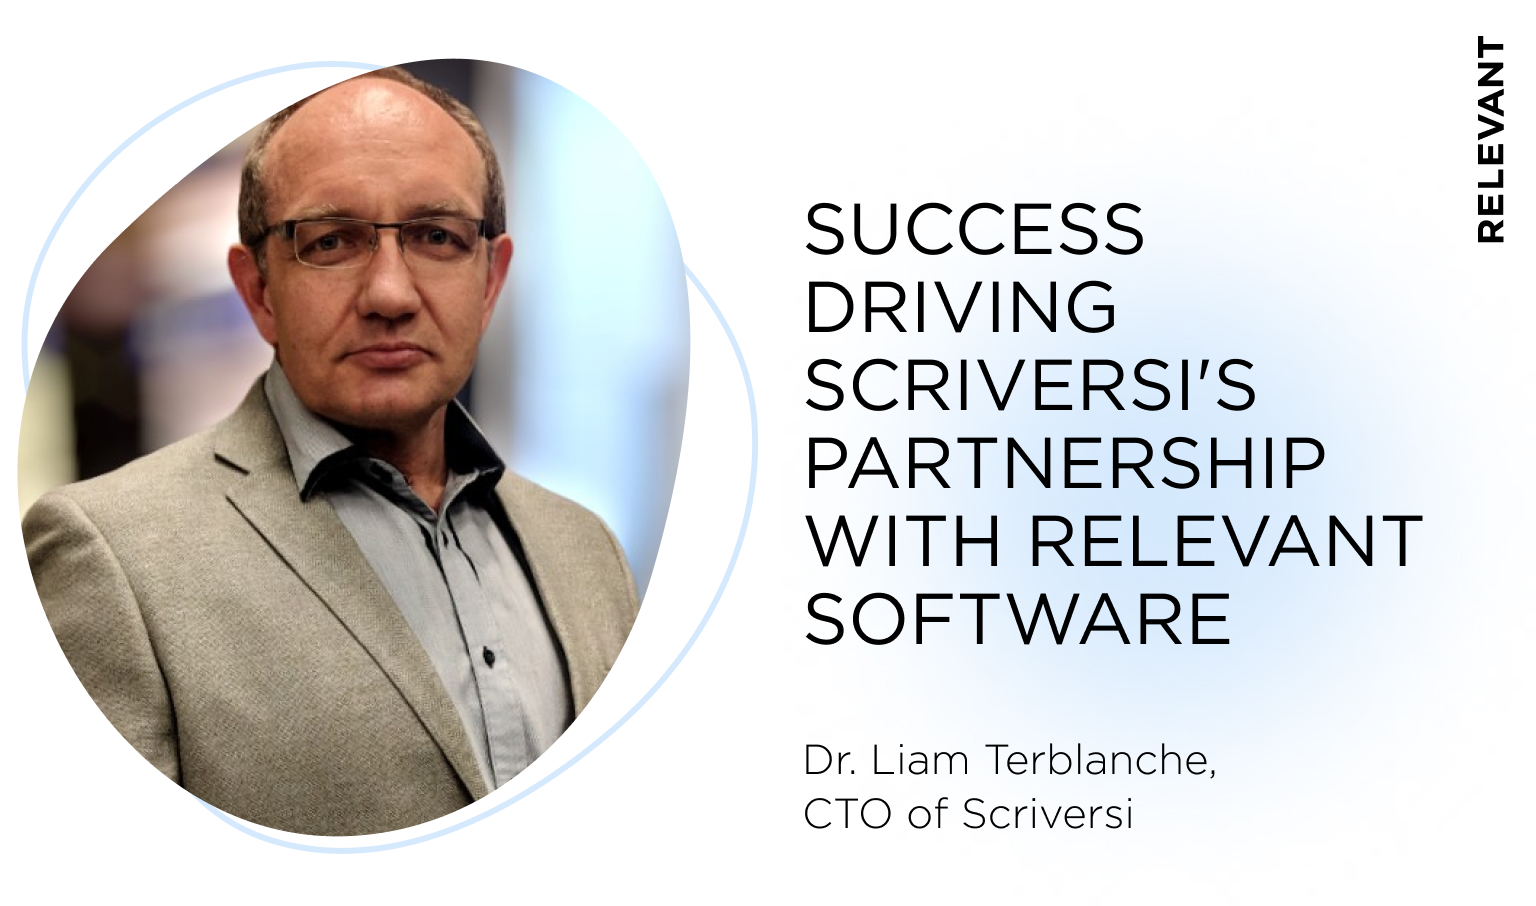 Success Driving Scriversi’s Partnership with Relevant Software